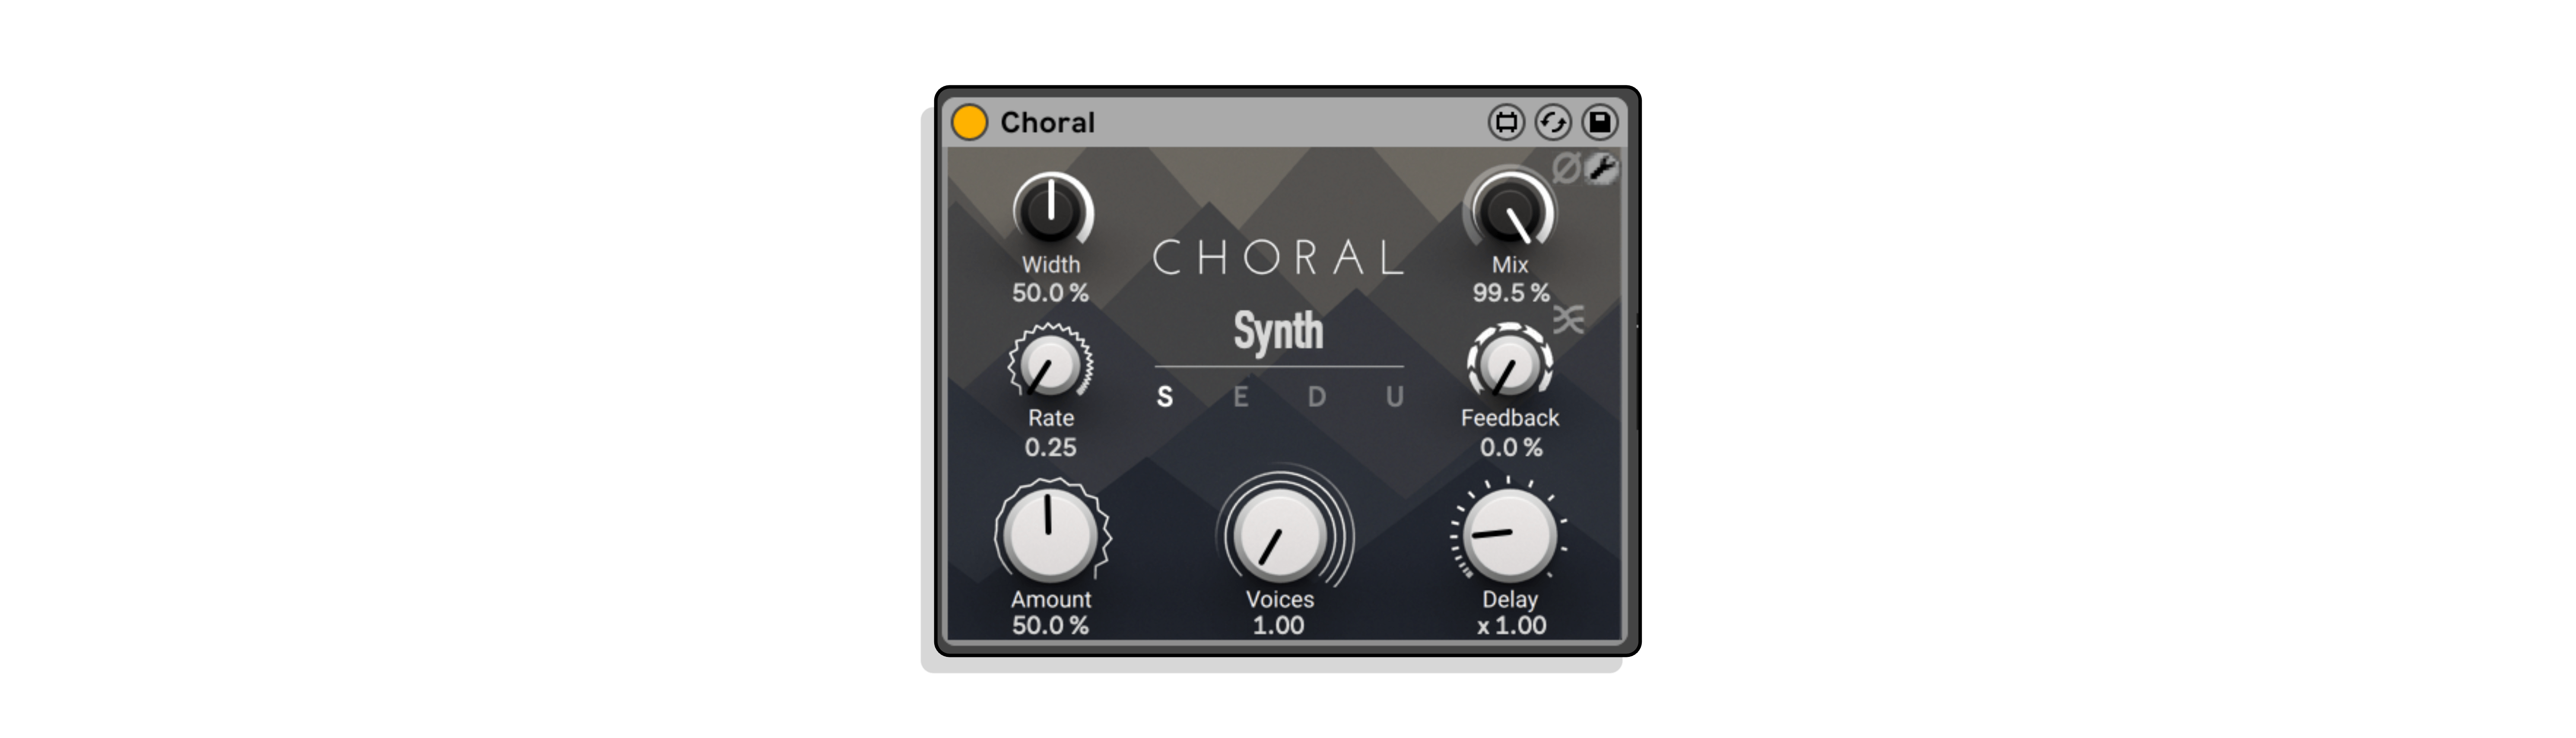 Choral-NI-Wrappers-Wide-Device-Template